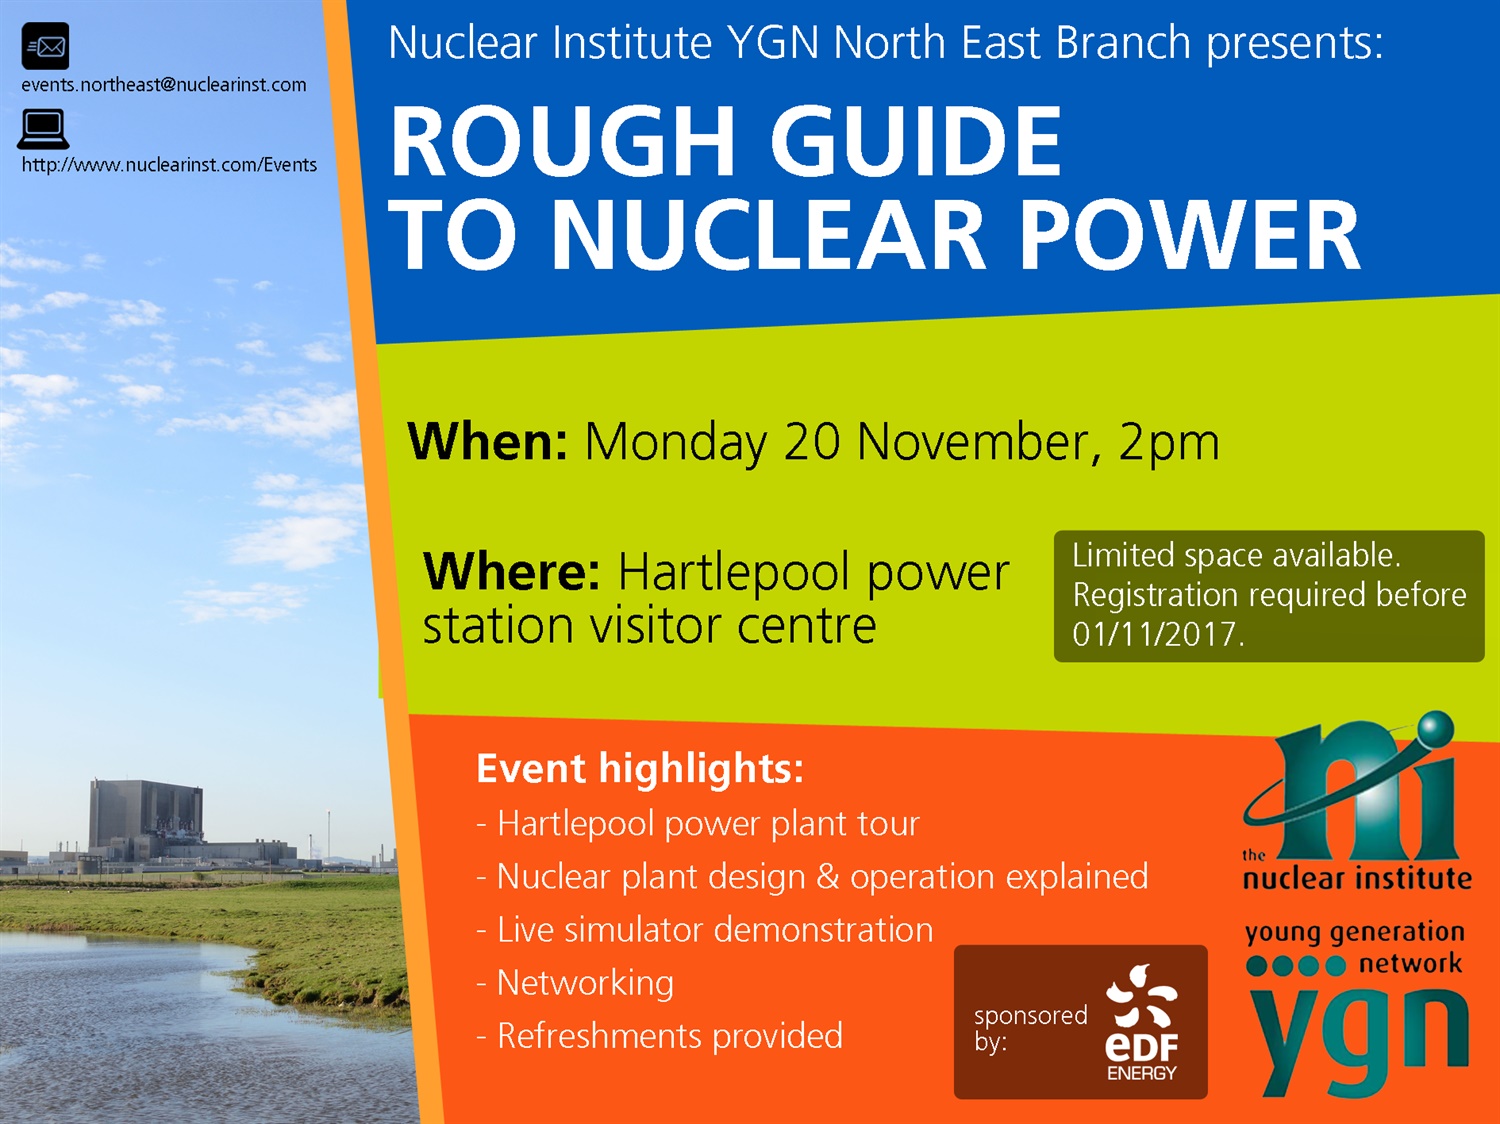 rough guide to nuclear power FINAL